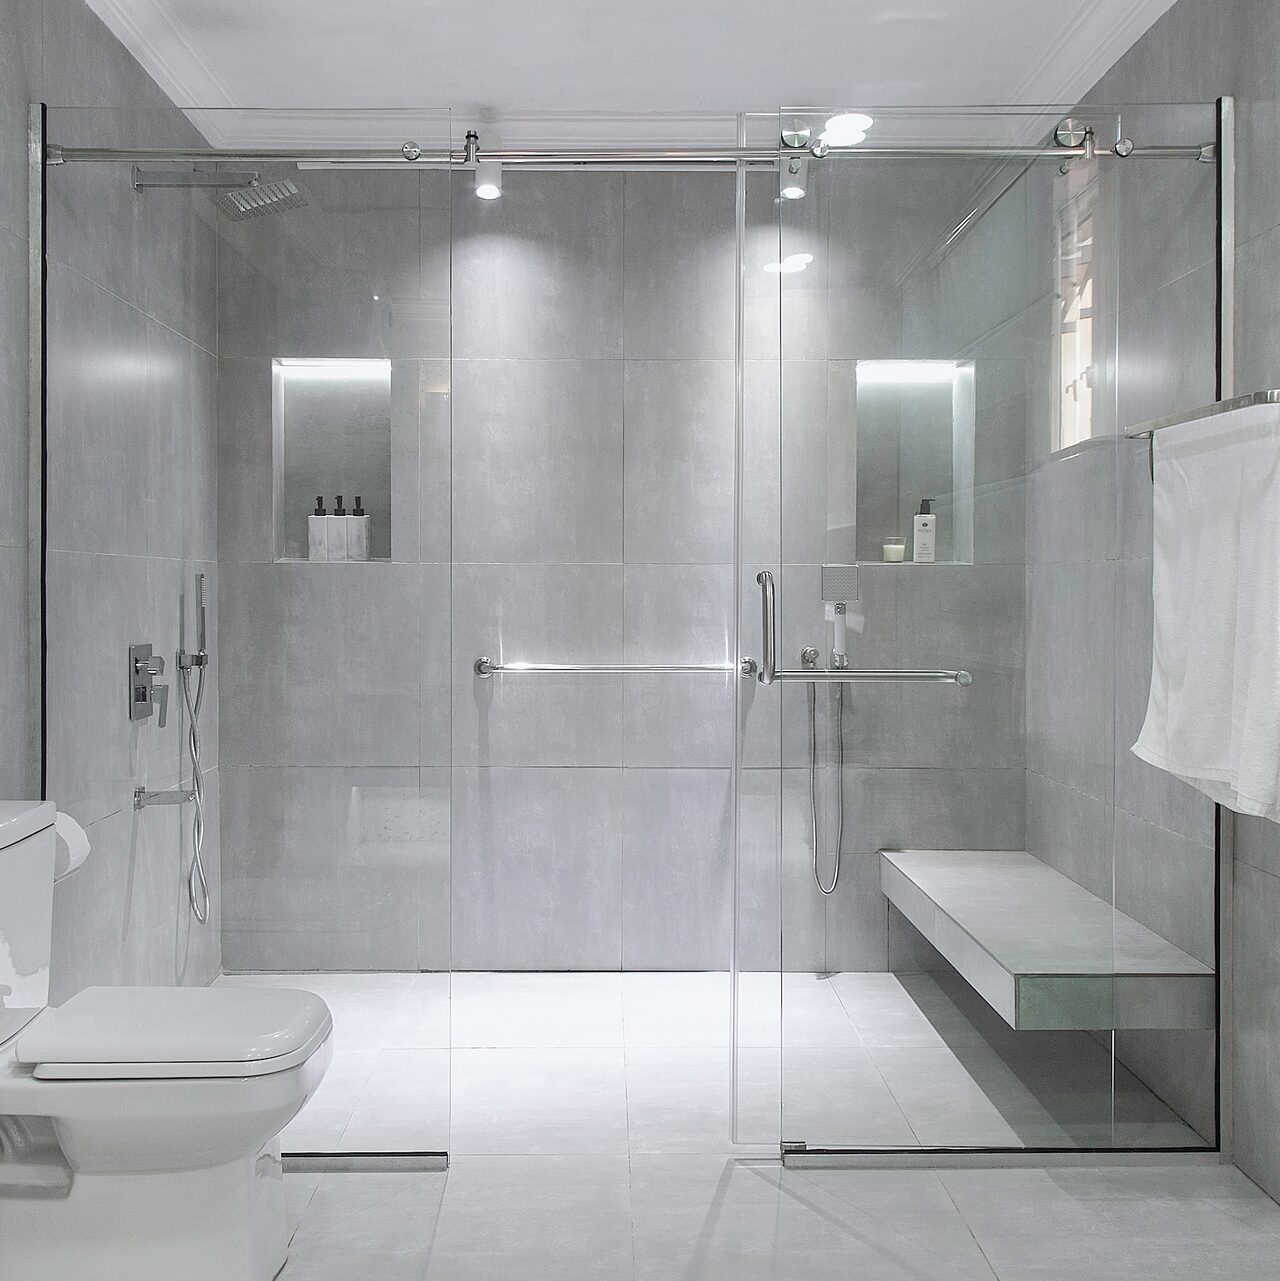 Shower Area in this modern bathroom renovation by 2107 Atelier.